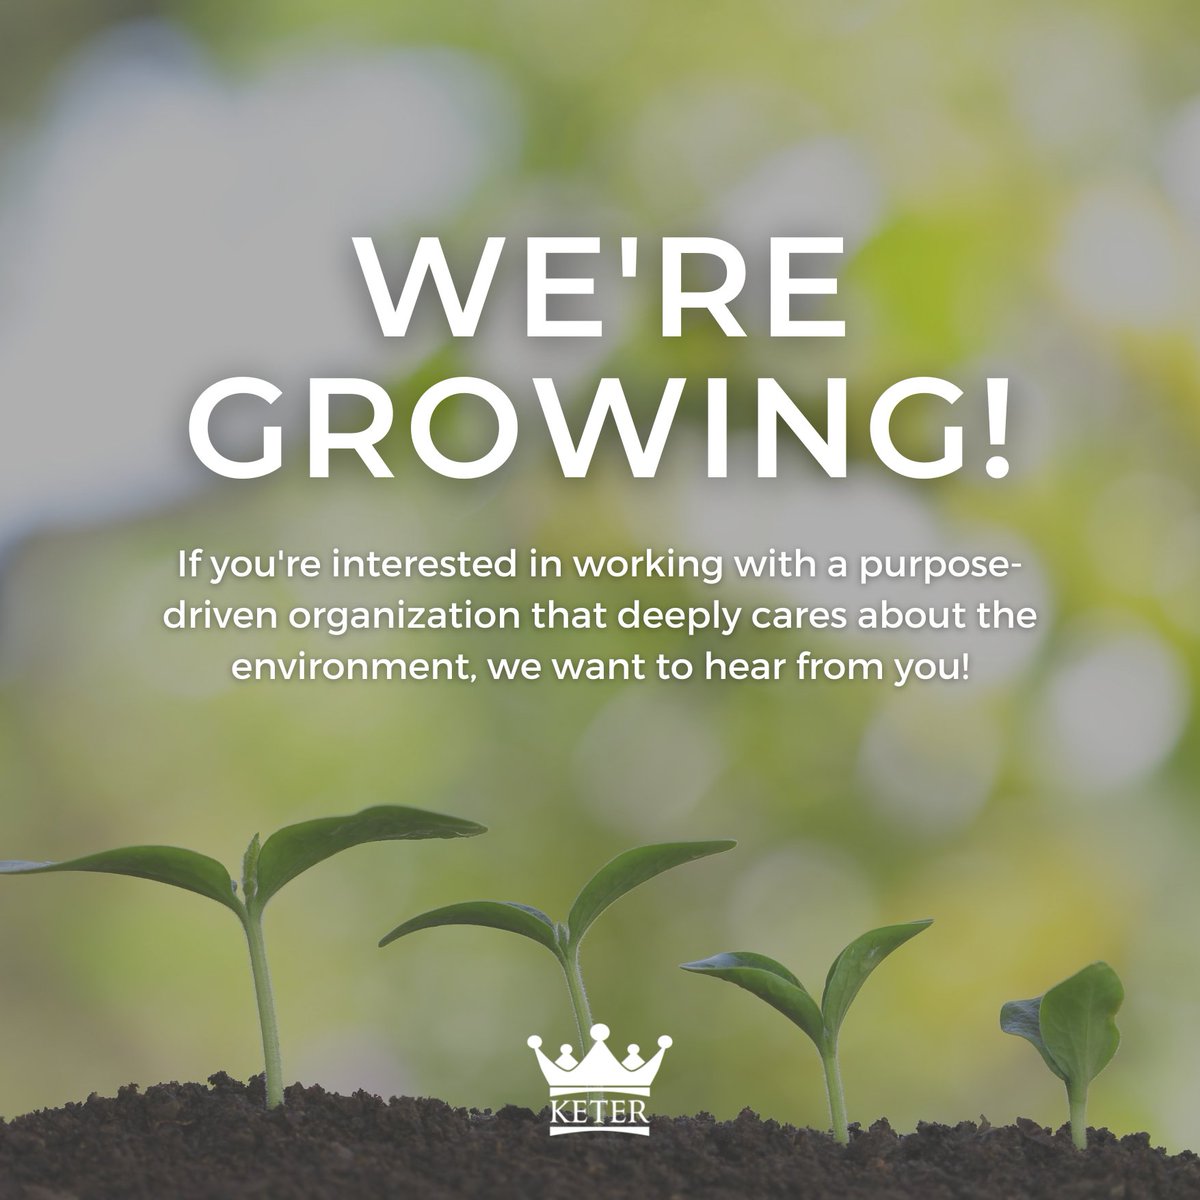 Are you or is someone you know interested in working with us at Keter? Apply today - hubs.ly/Q01Hvpmj0

#hiring #sustainability #sustainableaction #recycling #recyclingmanagment #gogreen #esg #ecofriendly #sustainablebusiness #greenfuture #sustainablesolutions #zerowaste